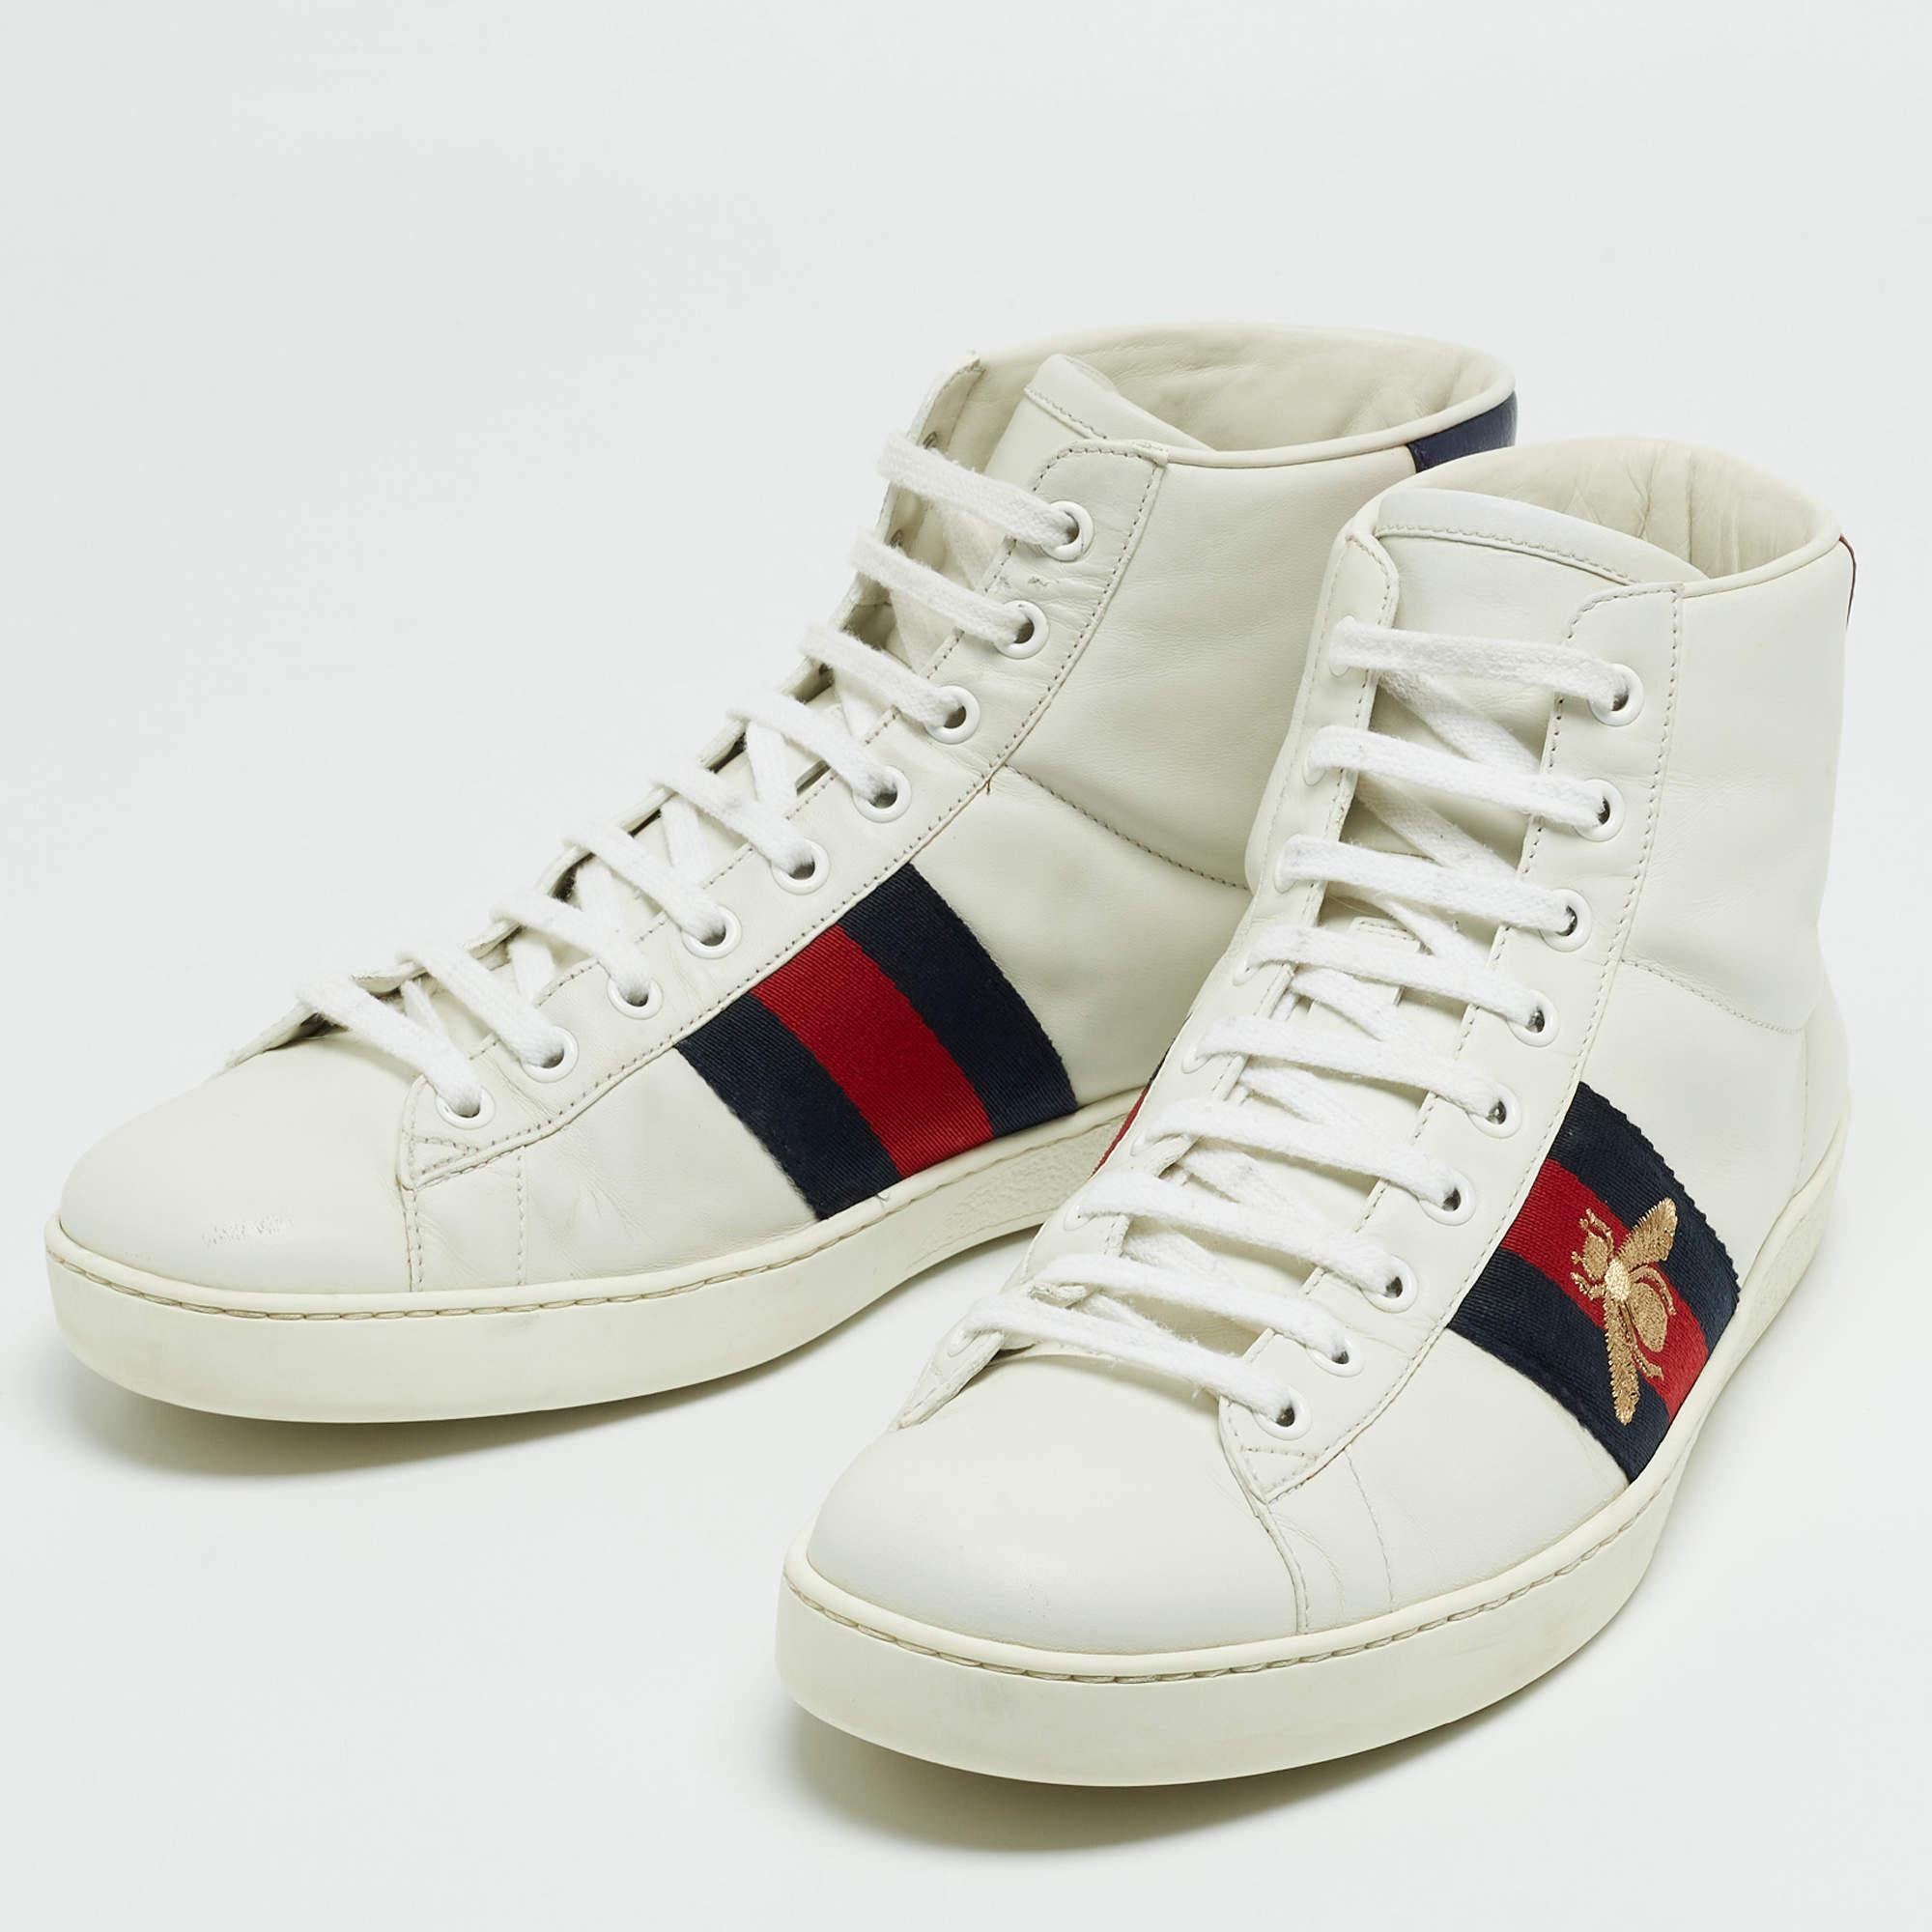 Gucci White/Blue Leather Embroidered Bee Web Ace High-Top Sneakers Size 41.5 1